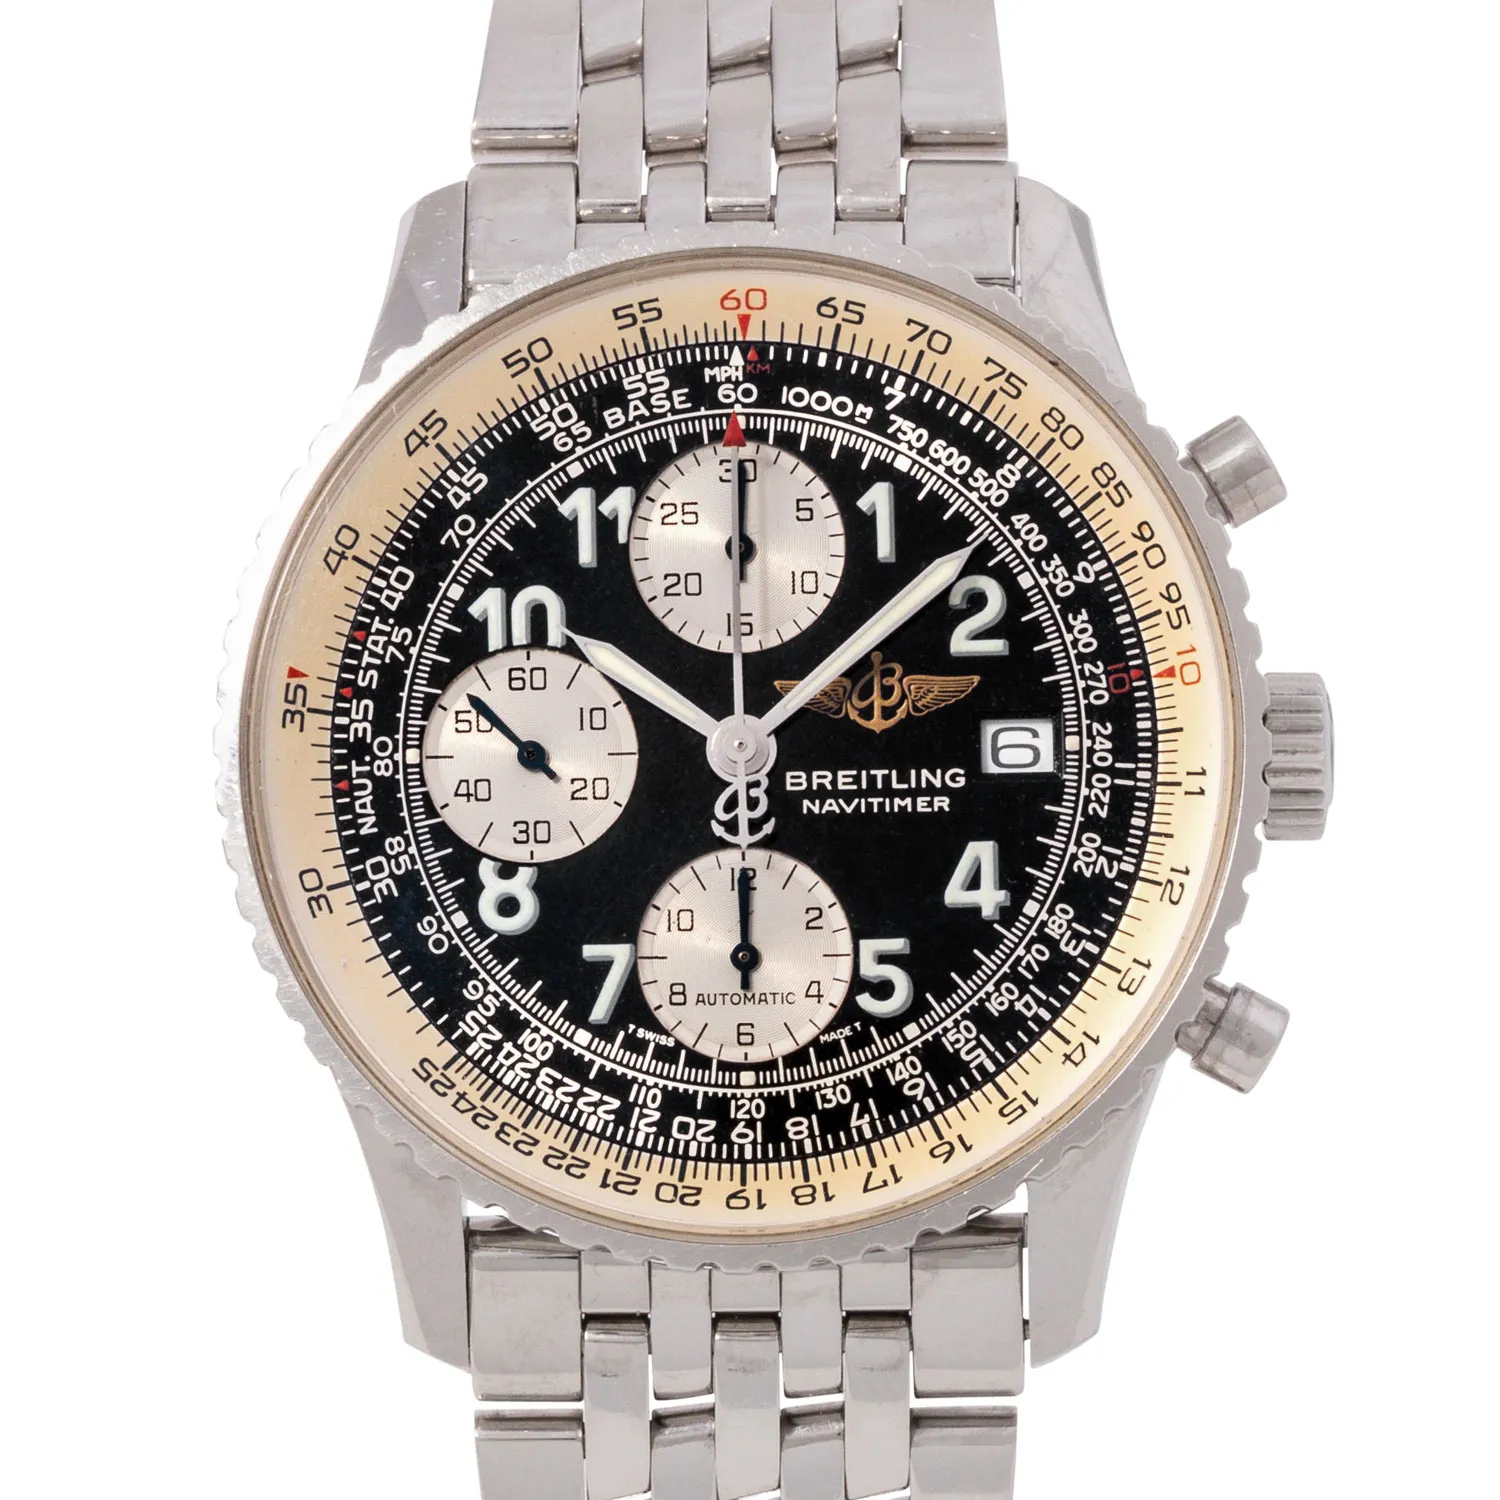 Breitling Old Navitimer A13322-165 41.5mm Stainless steel